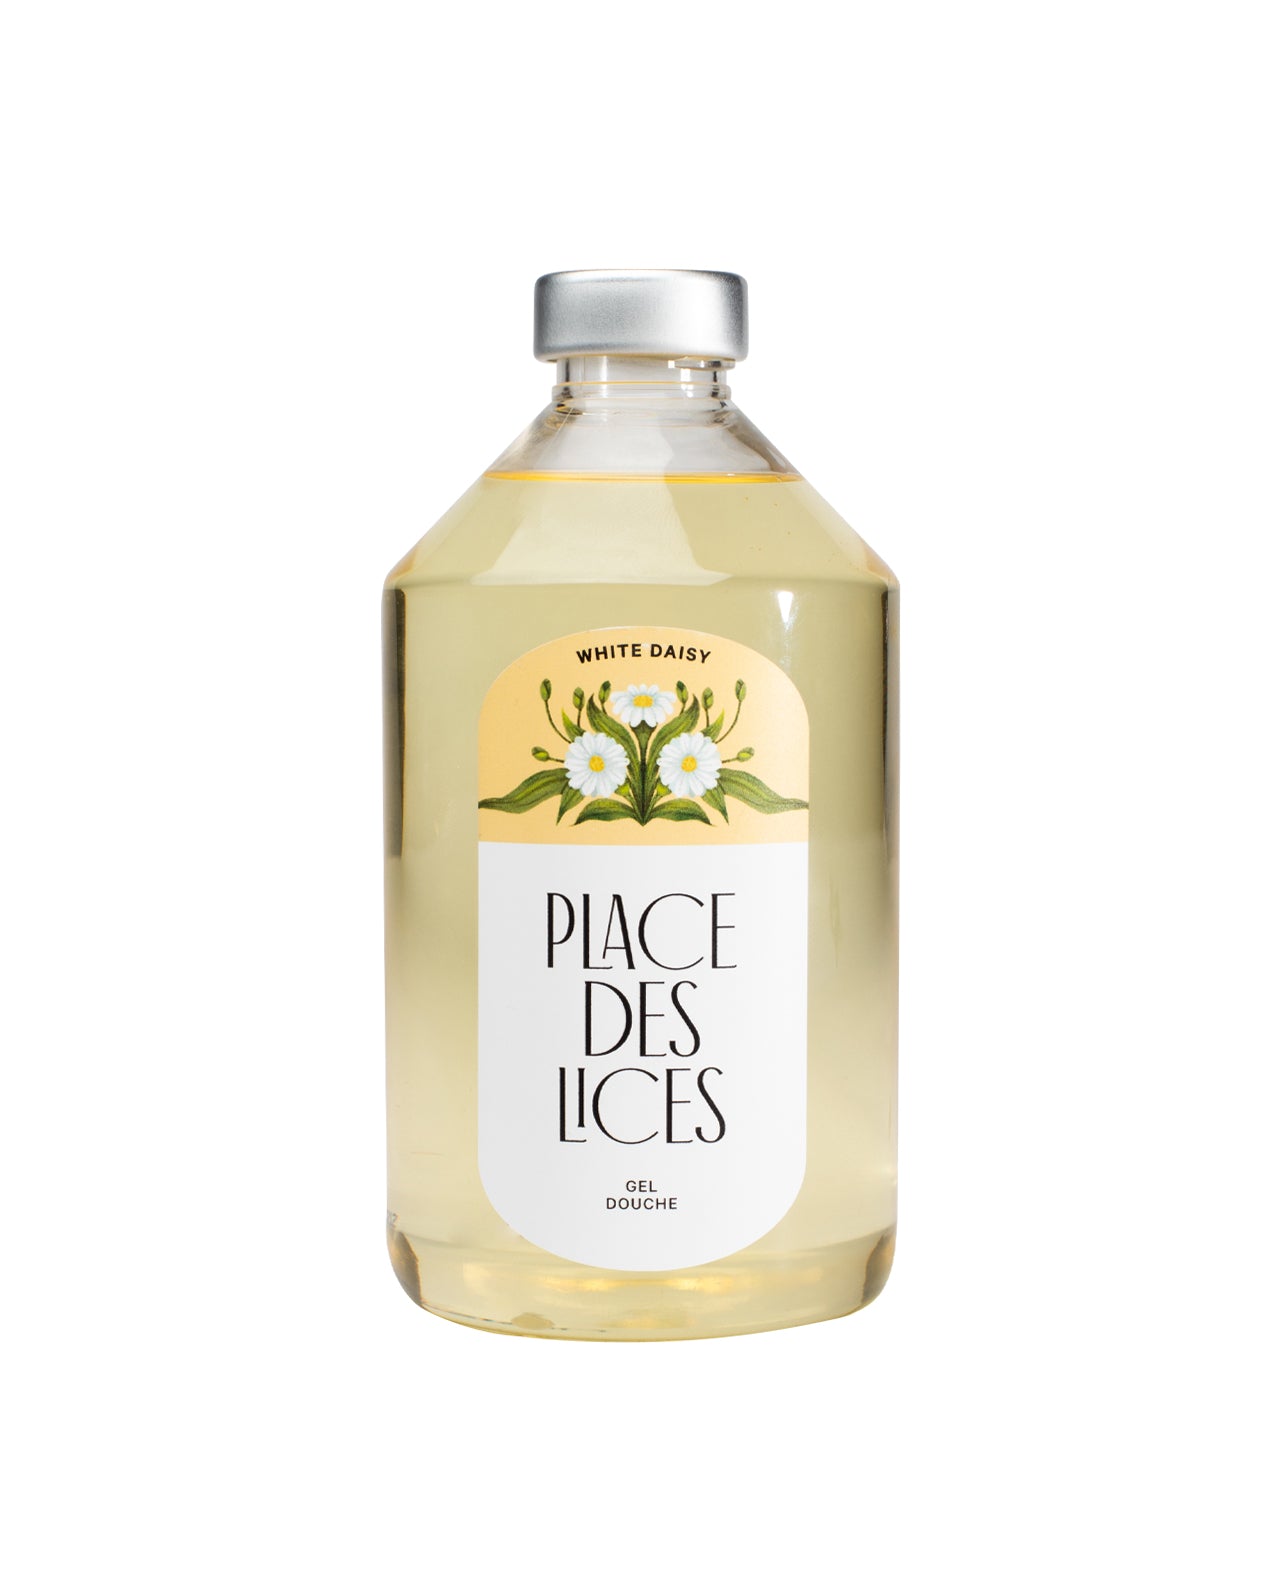 White Daisy Body Wash 500ml Bottle by Place des Lices